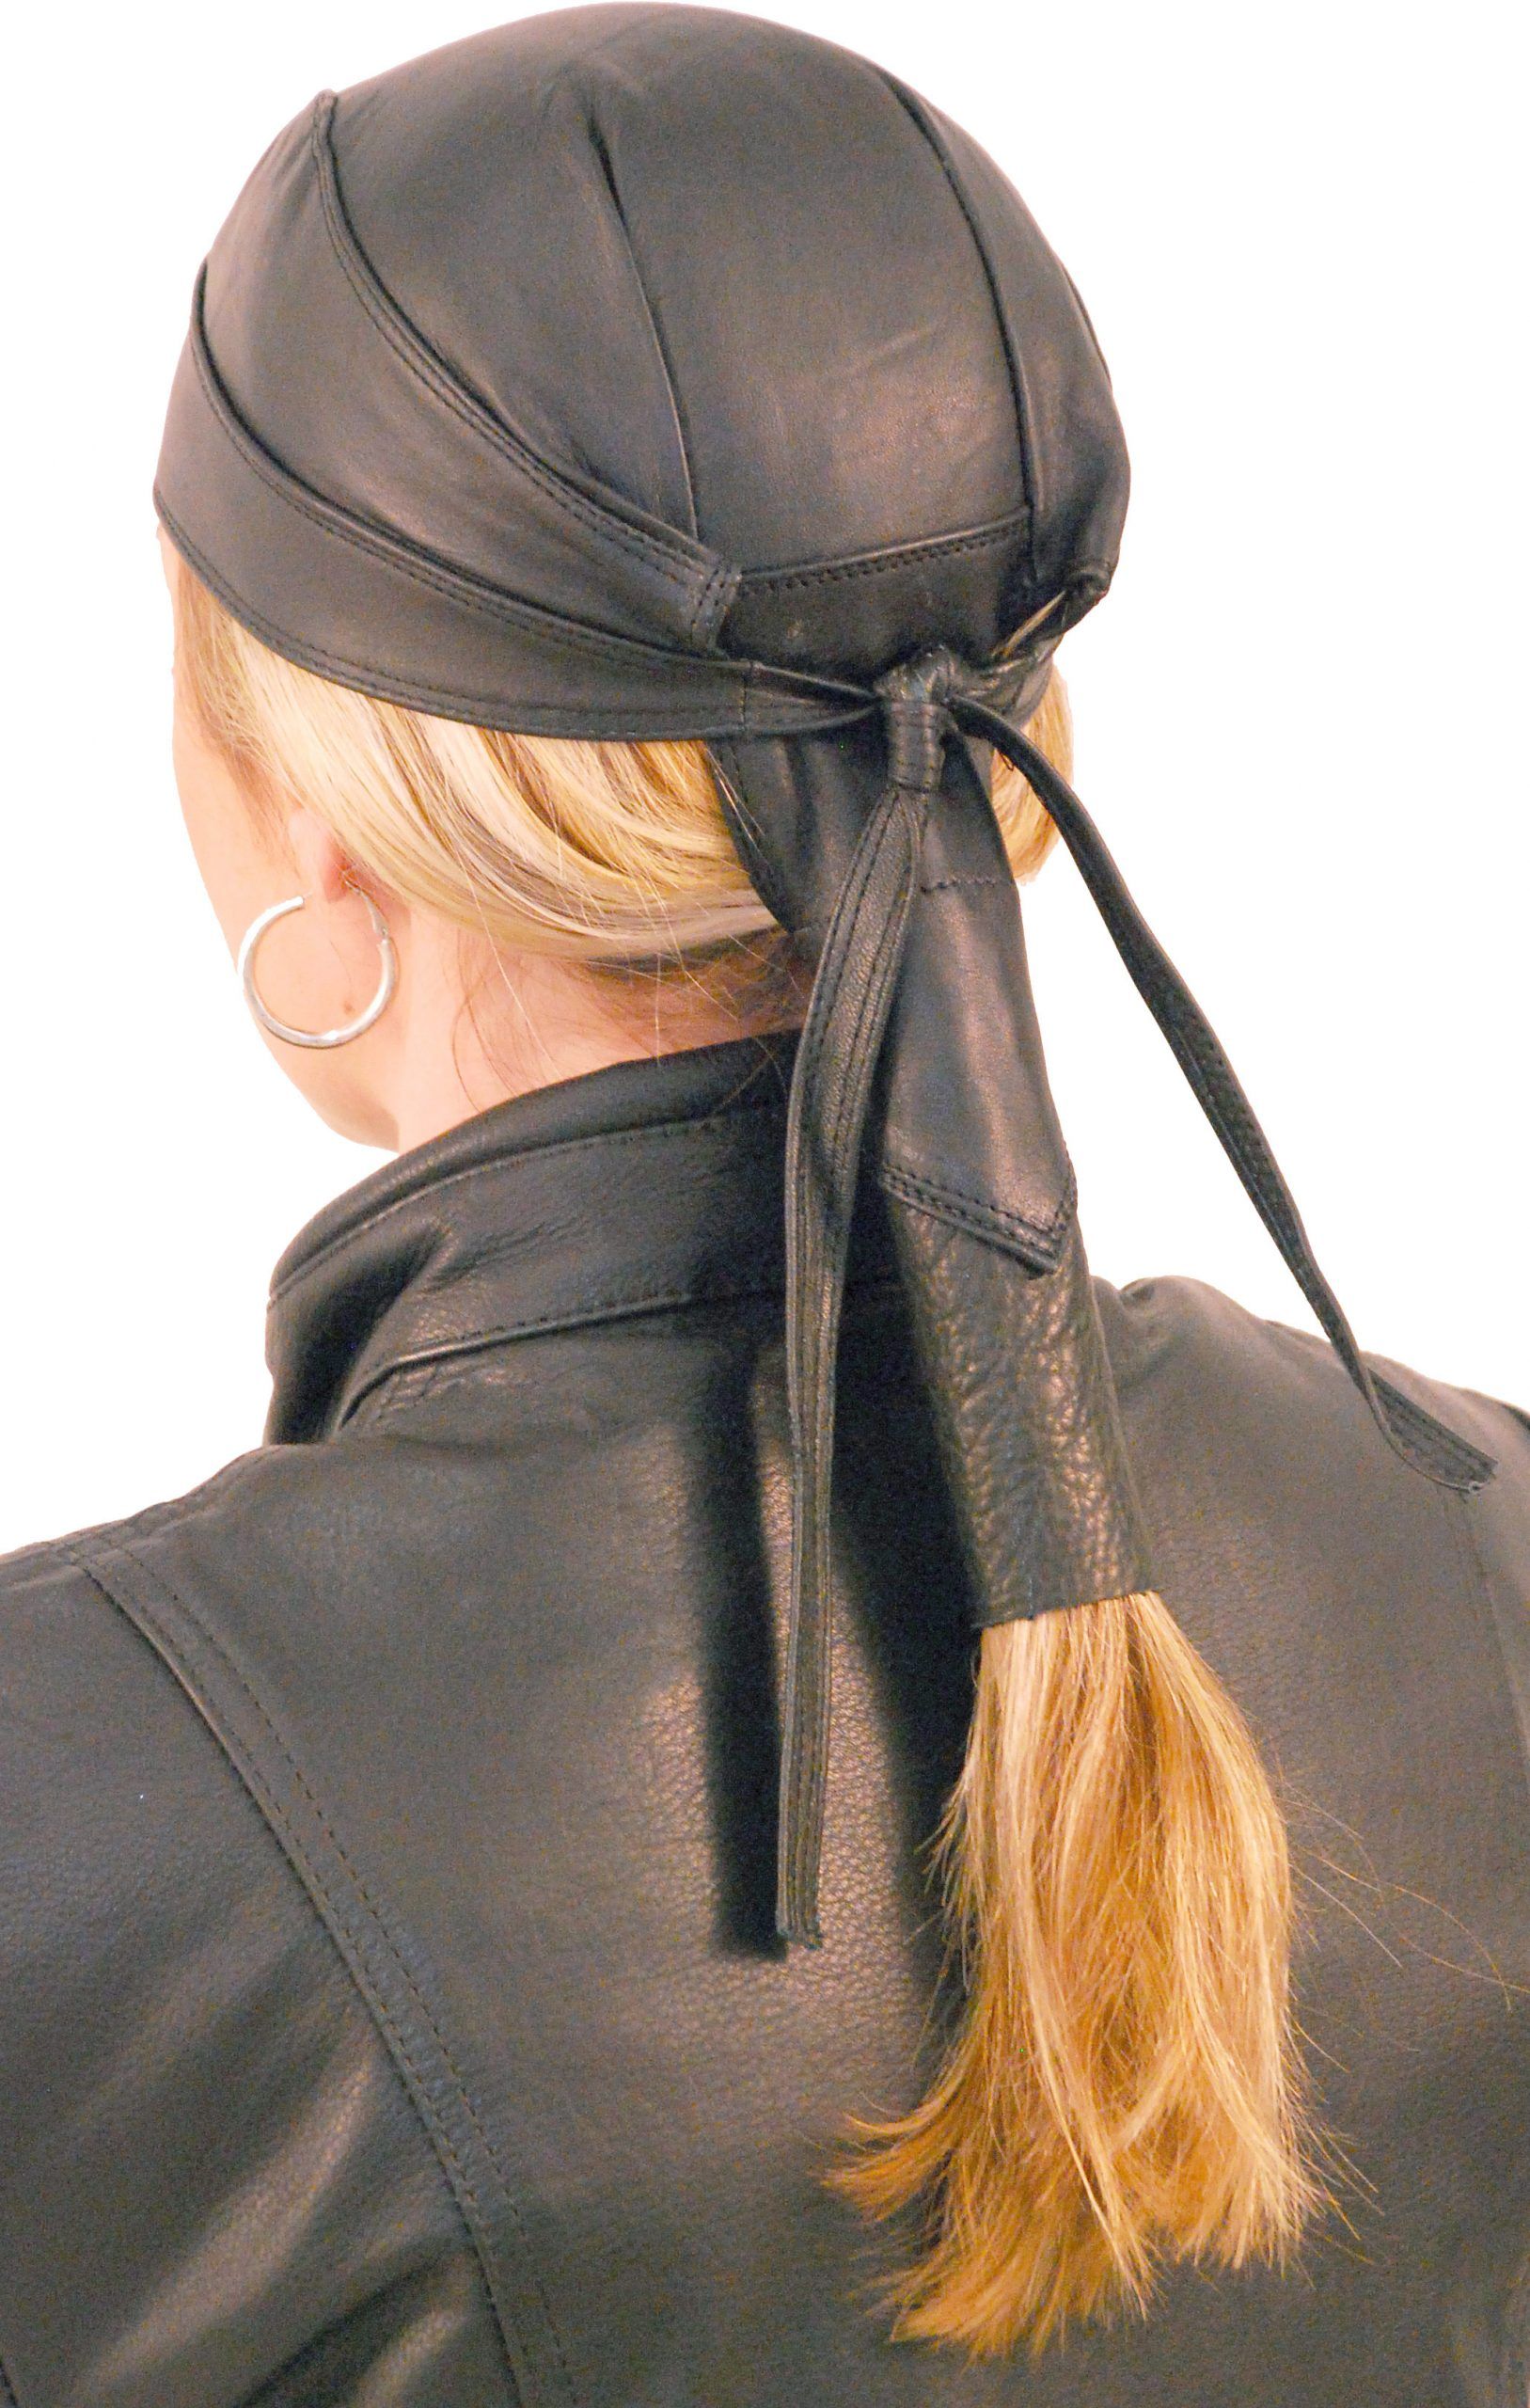 Leather skull cap with pony tail hair wrap.